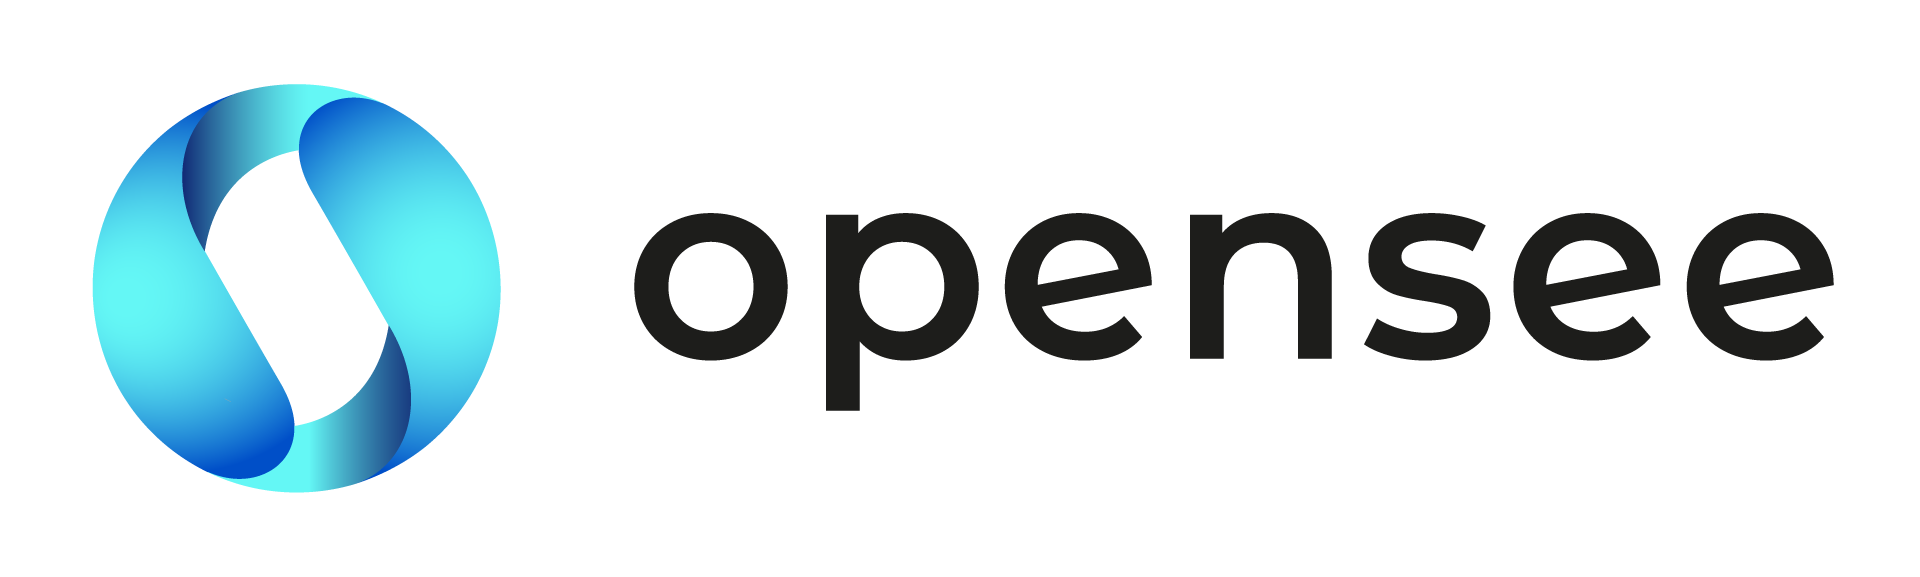 ICA Announce New Name: OpenSee 